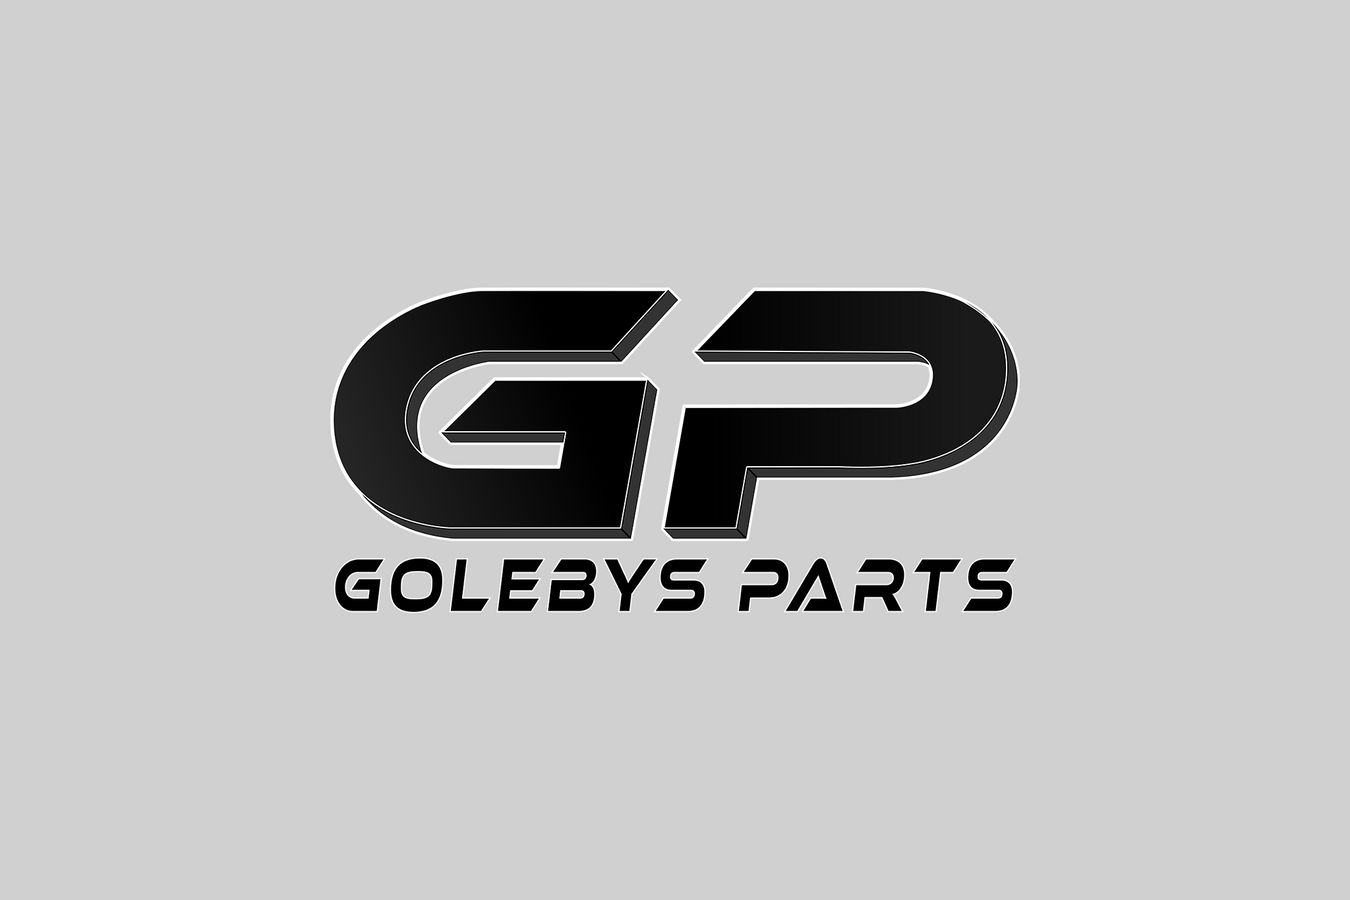 Goleby-s-Parts Goleby's Parts